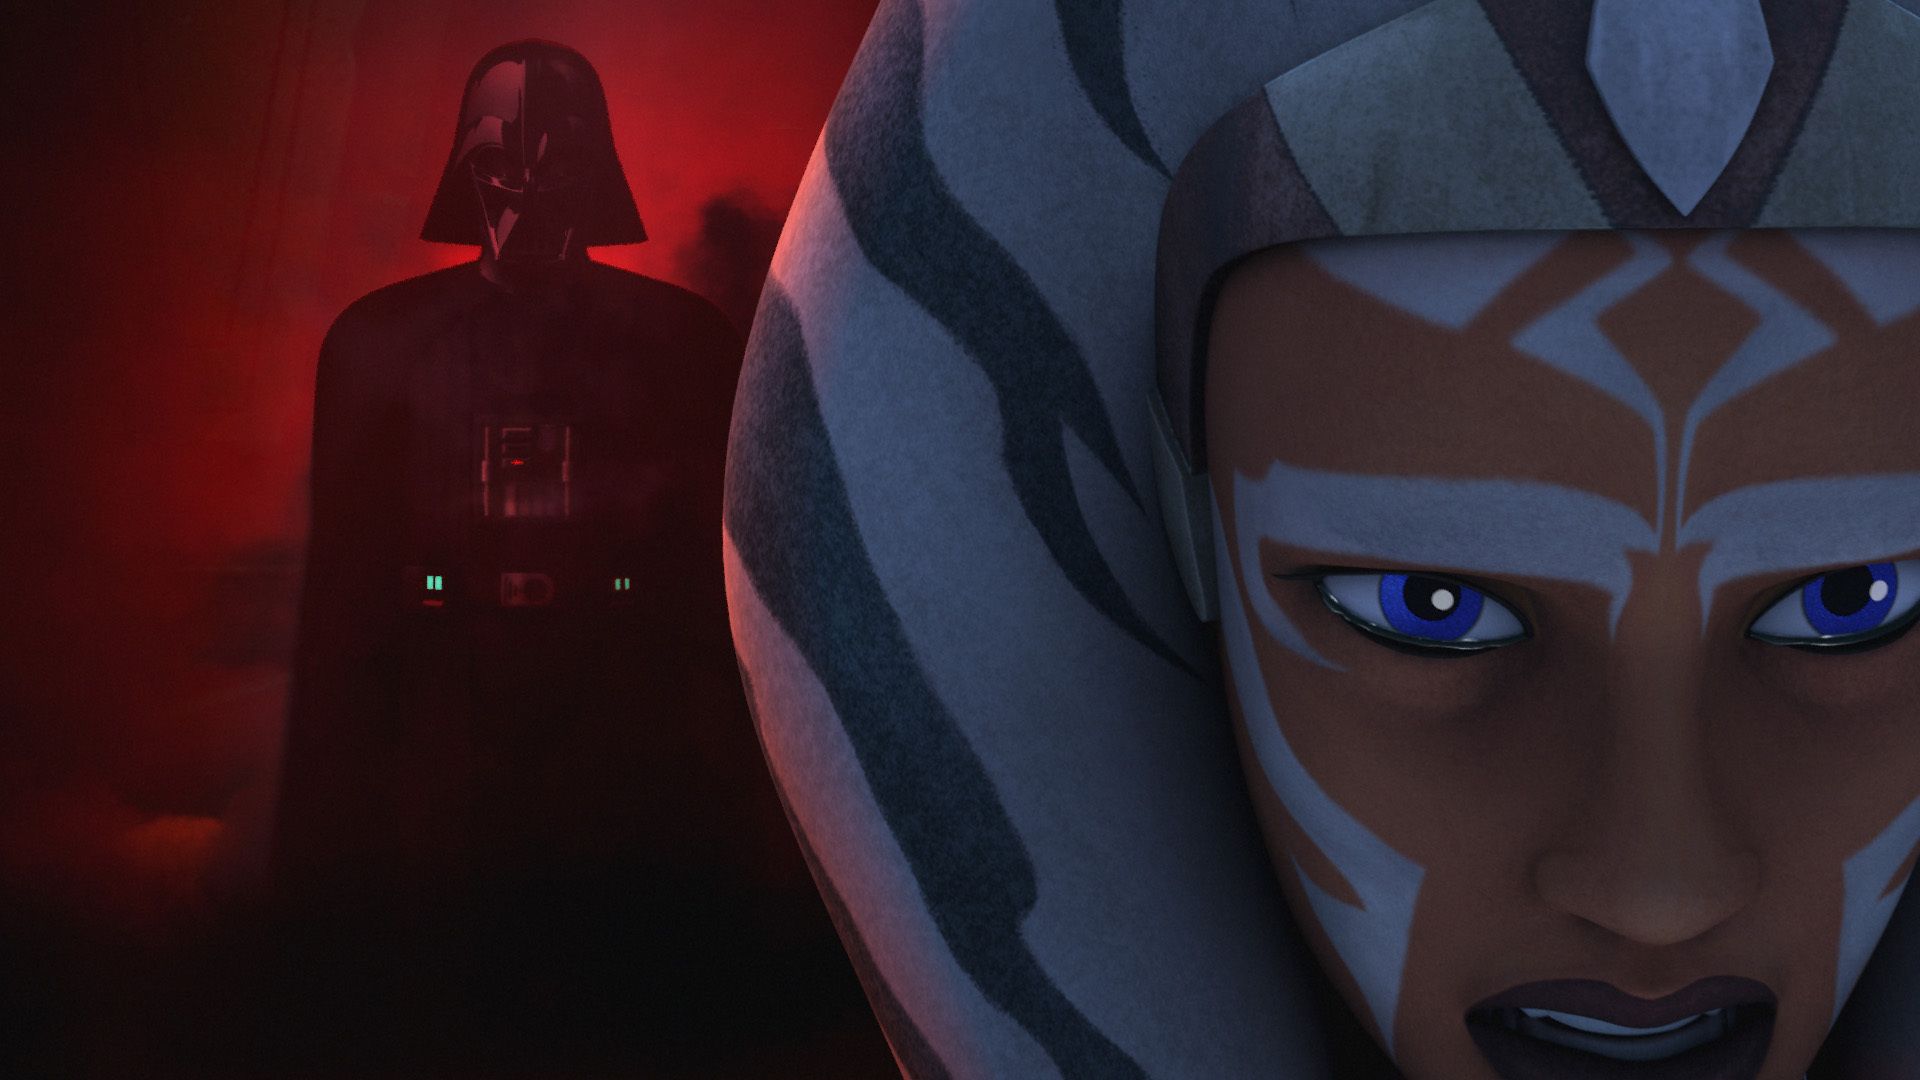 of the Most Important Anakin and Ahsoka Moments